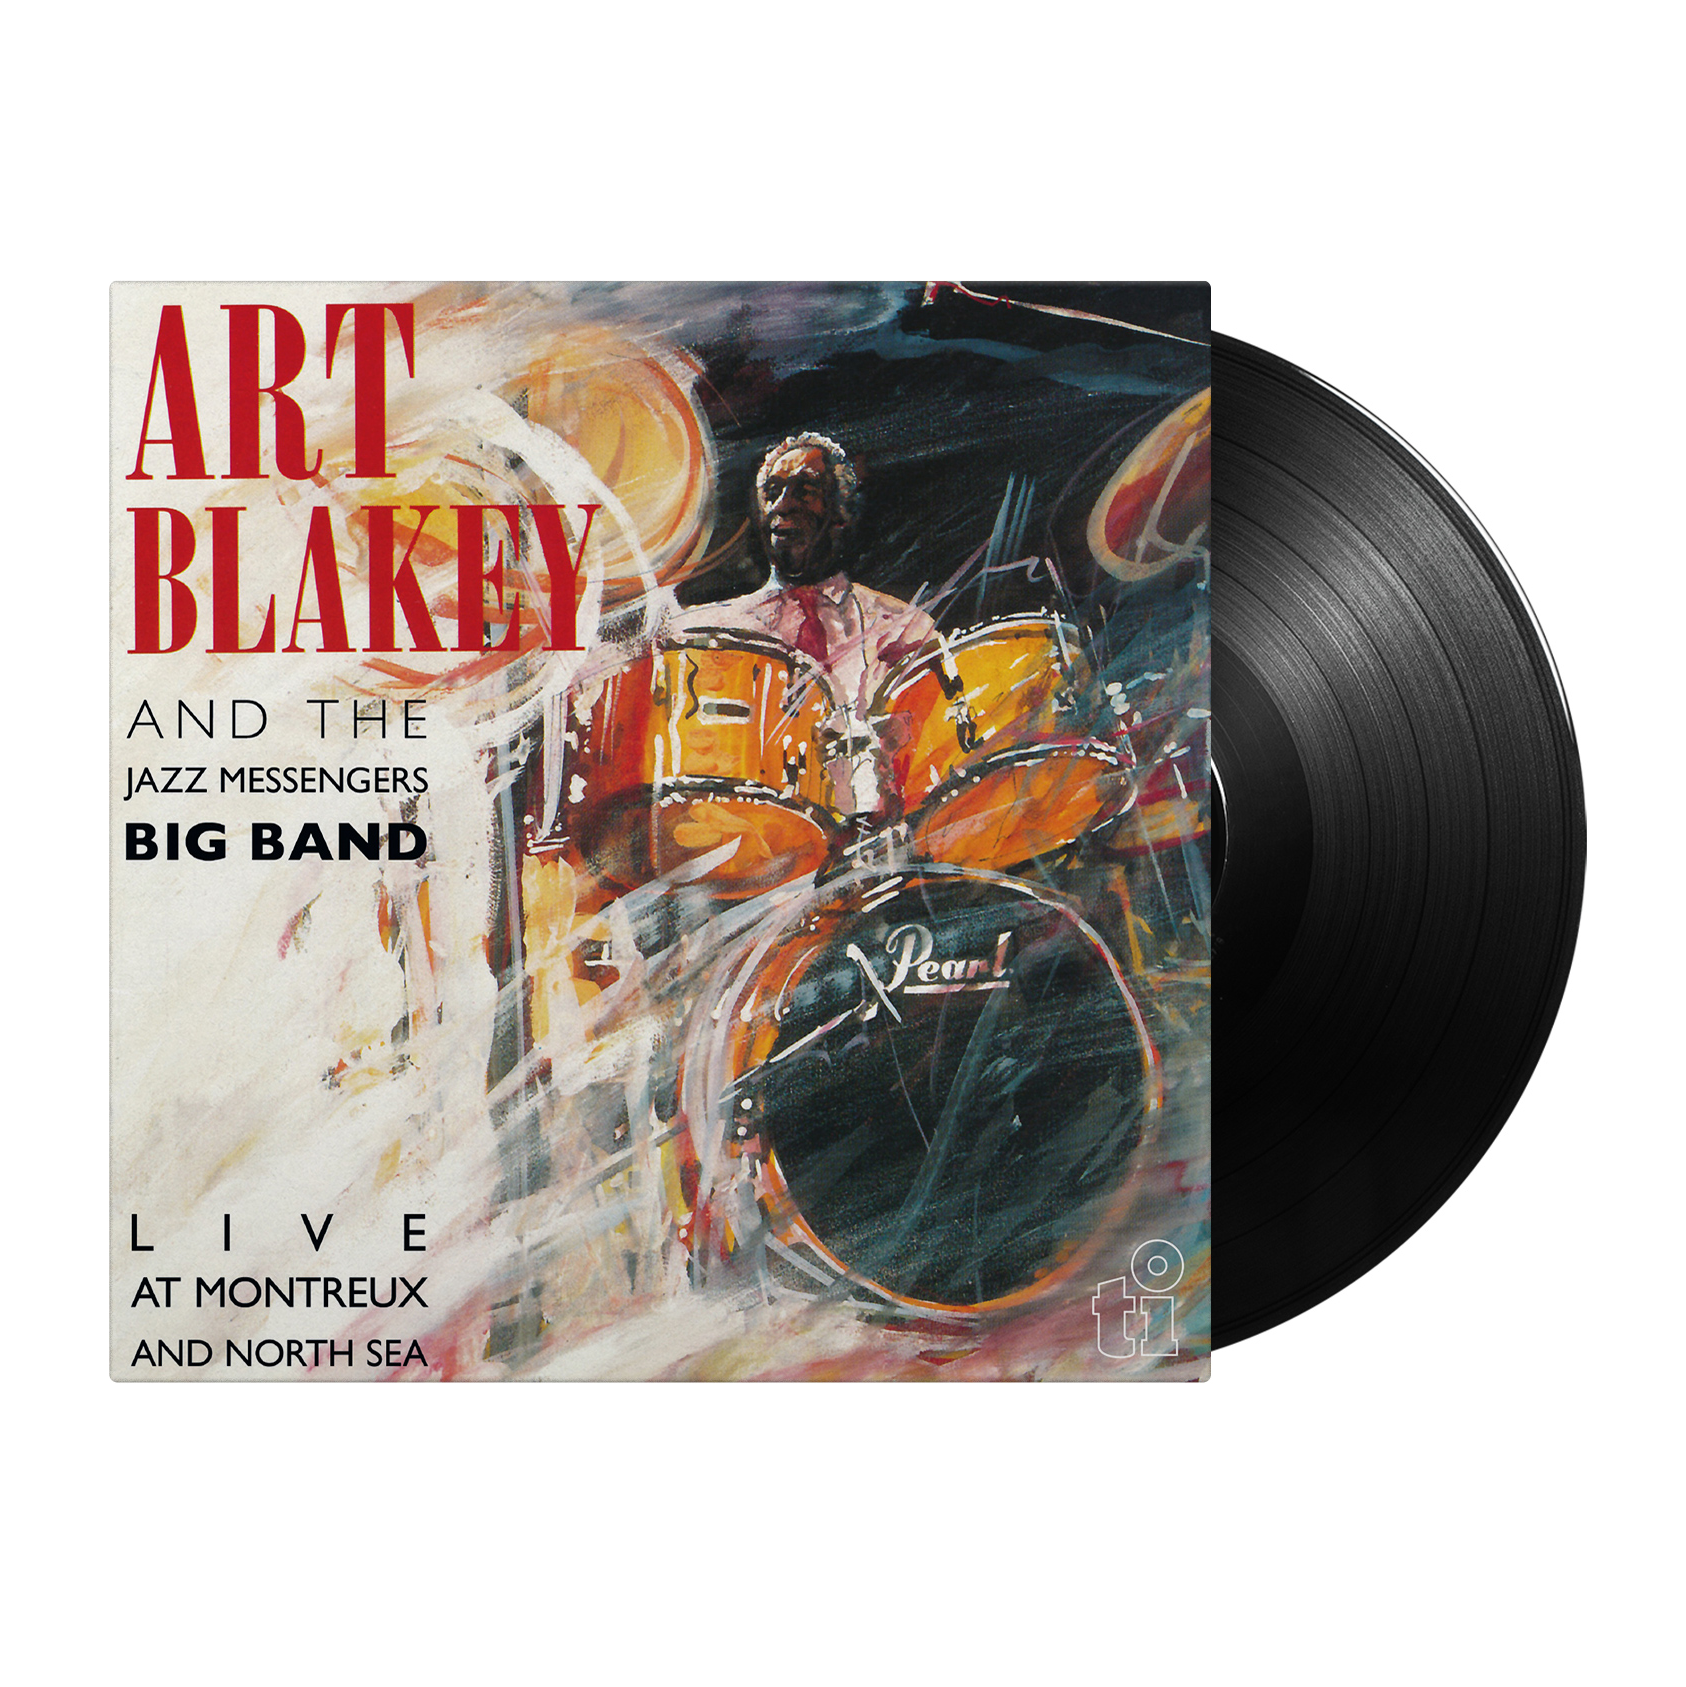 Art Blakey & The Jazz Messengers Big Band - Live At Montreux and North Sea: Vinyl LP